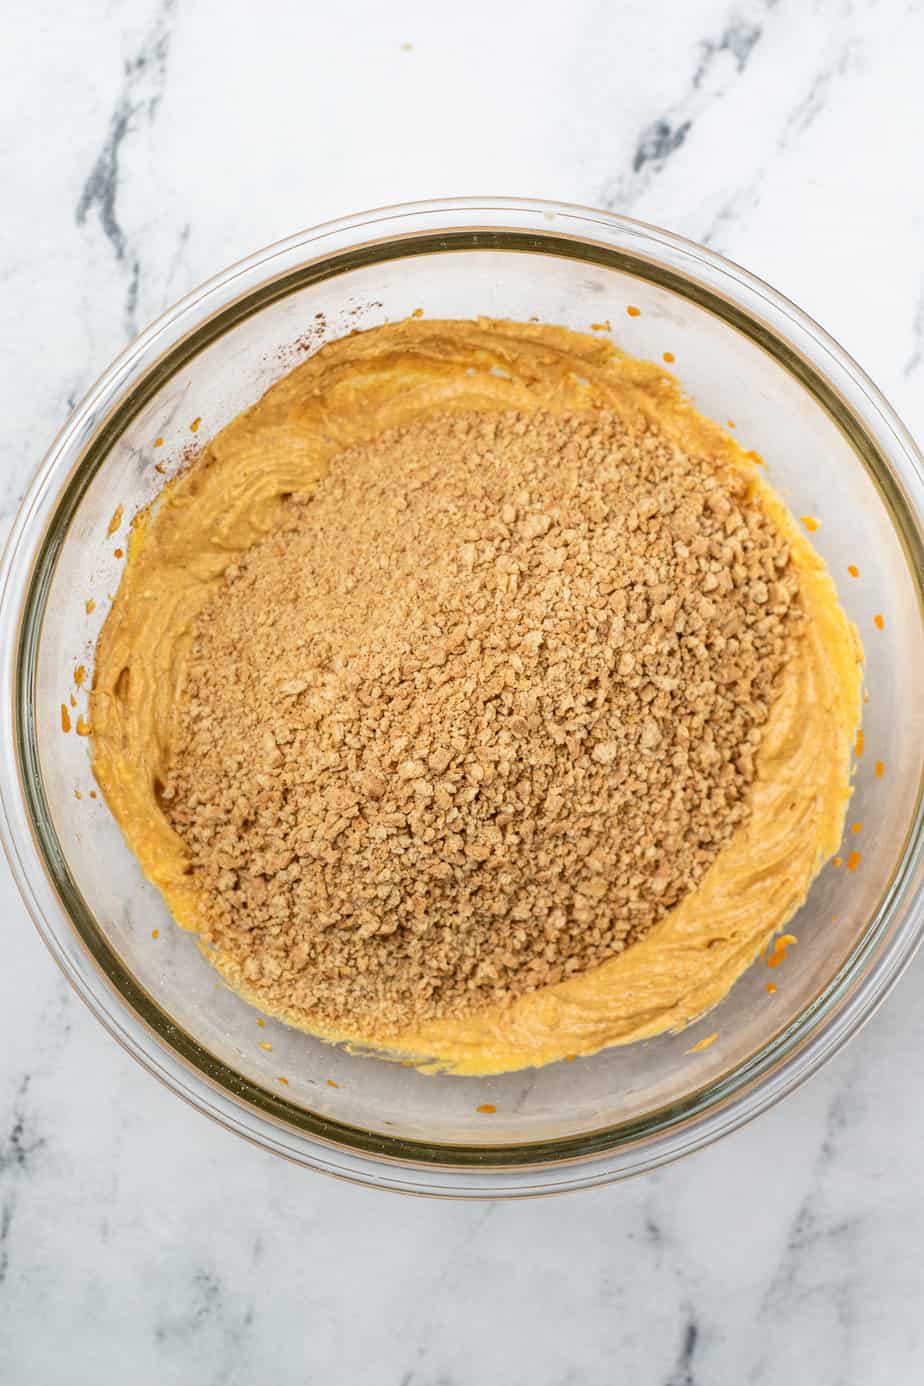 Graham cracker crumbs poured in a large mixing bowl on top of pumpkin cheesecake mixture to be blended on a counter from overhead.